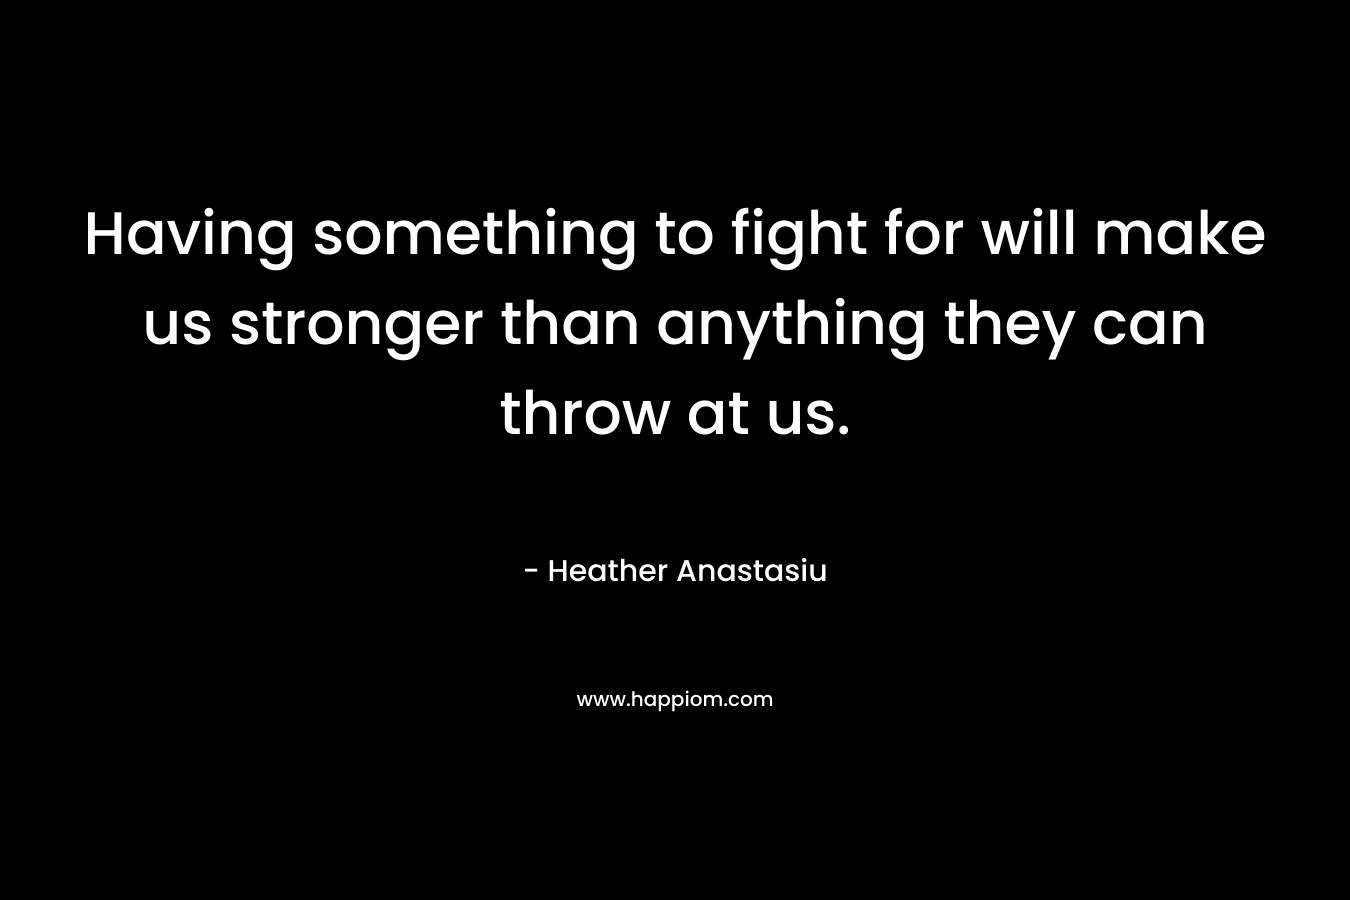 Having something to fight for will make us stronger than anything they can throw at us.